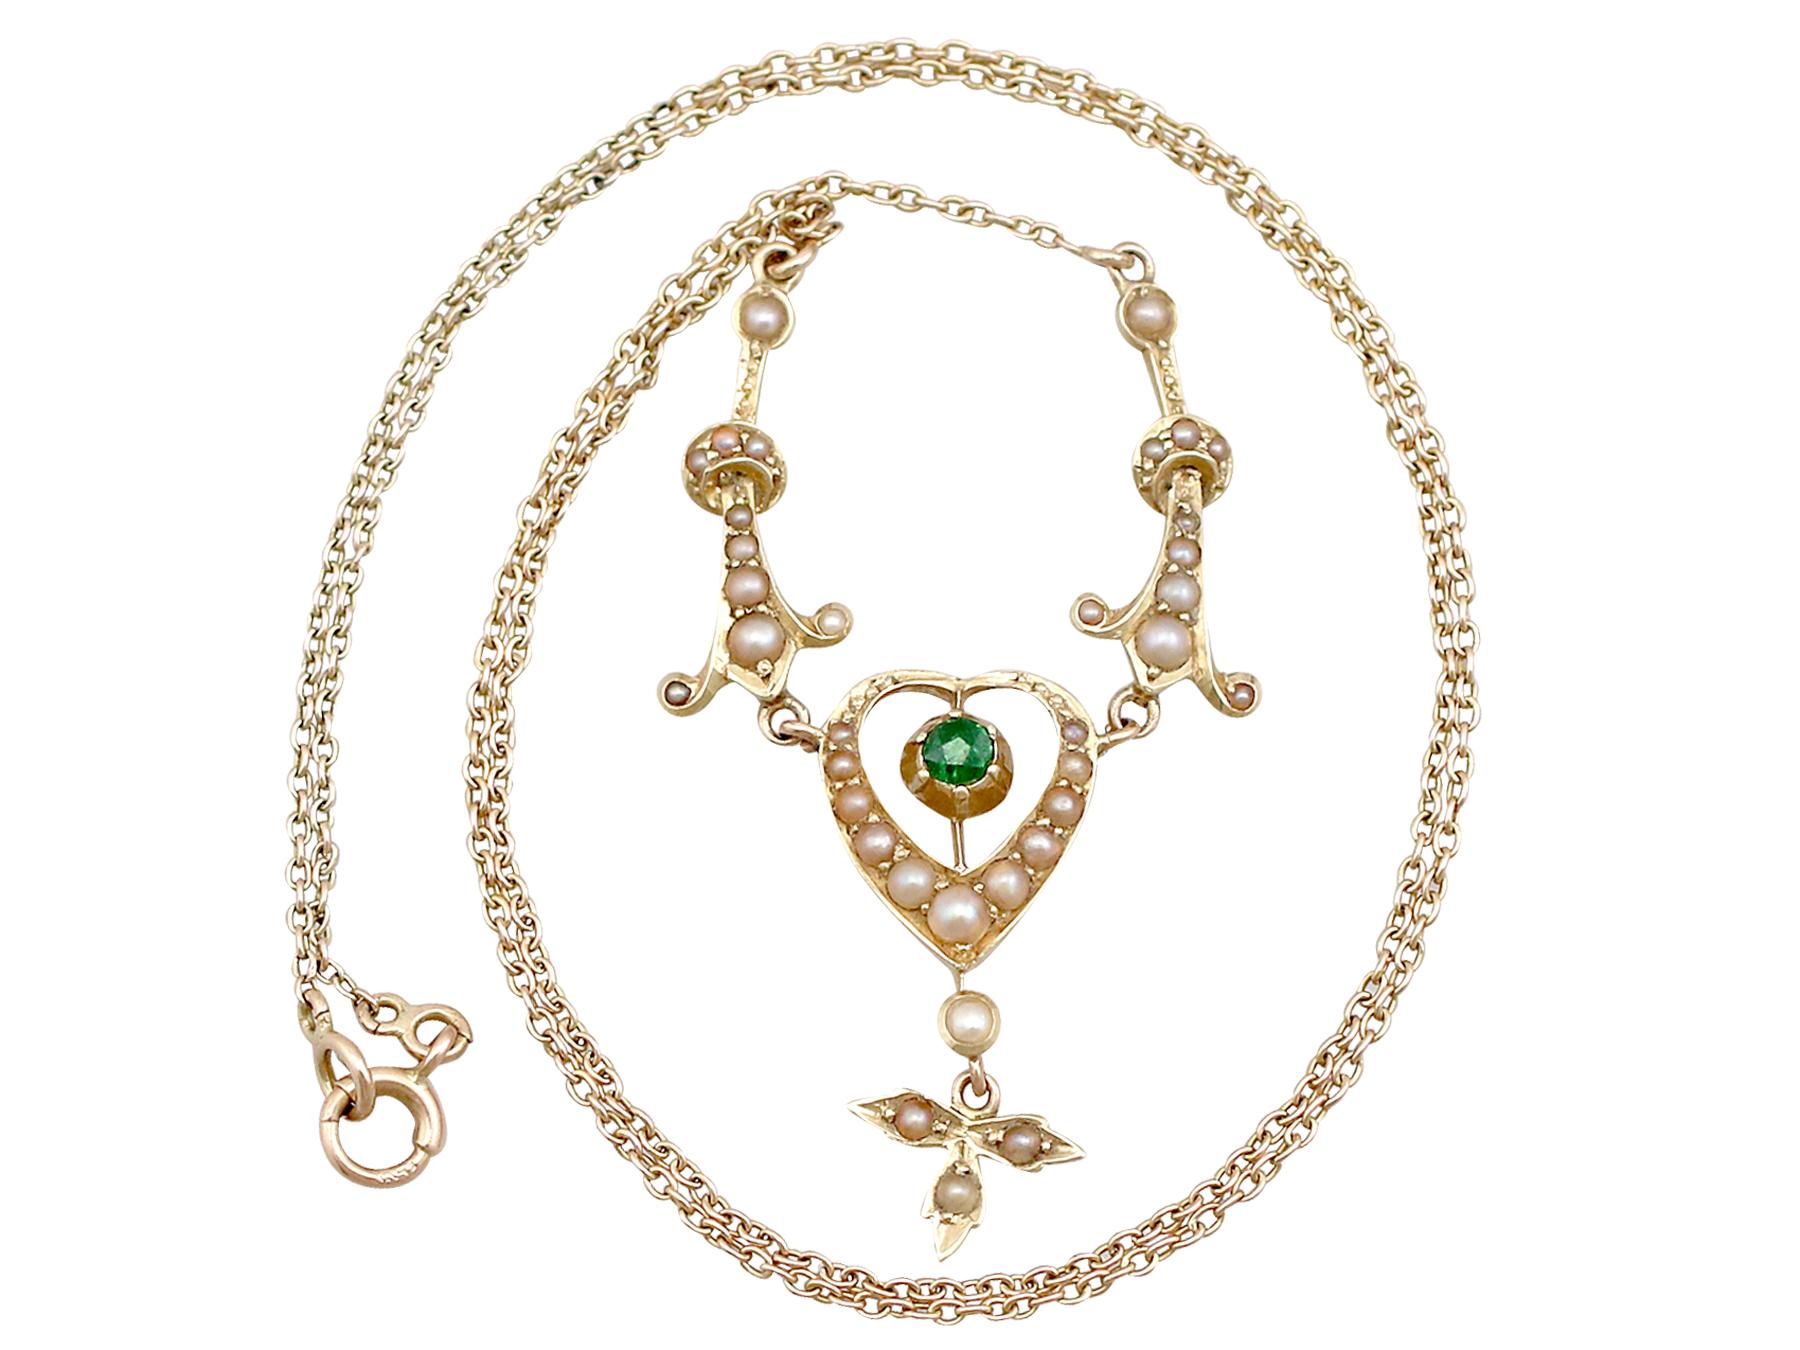 This fine and impressive peridot necklace has been crafted in 15k yellow gold.

The necklace displays a feature 0.12Ct round cut peridot bezel set to the center of a pierced decorated, pearl set, heart shaped setting.

A leaf design trefoil shaped